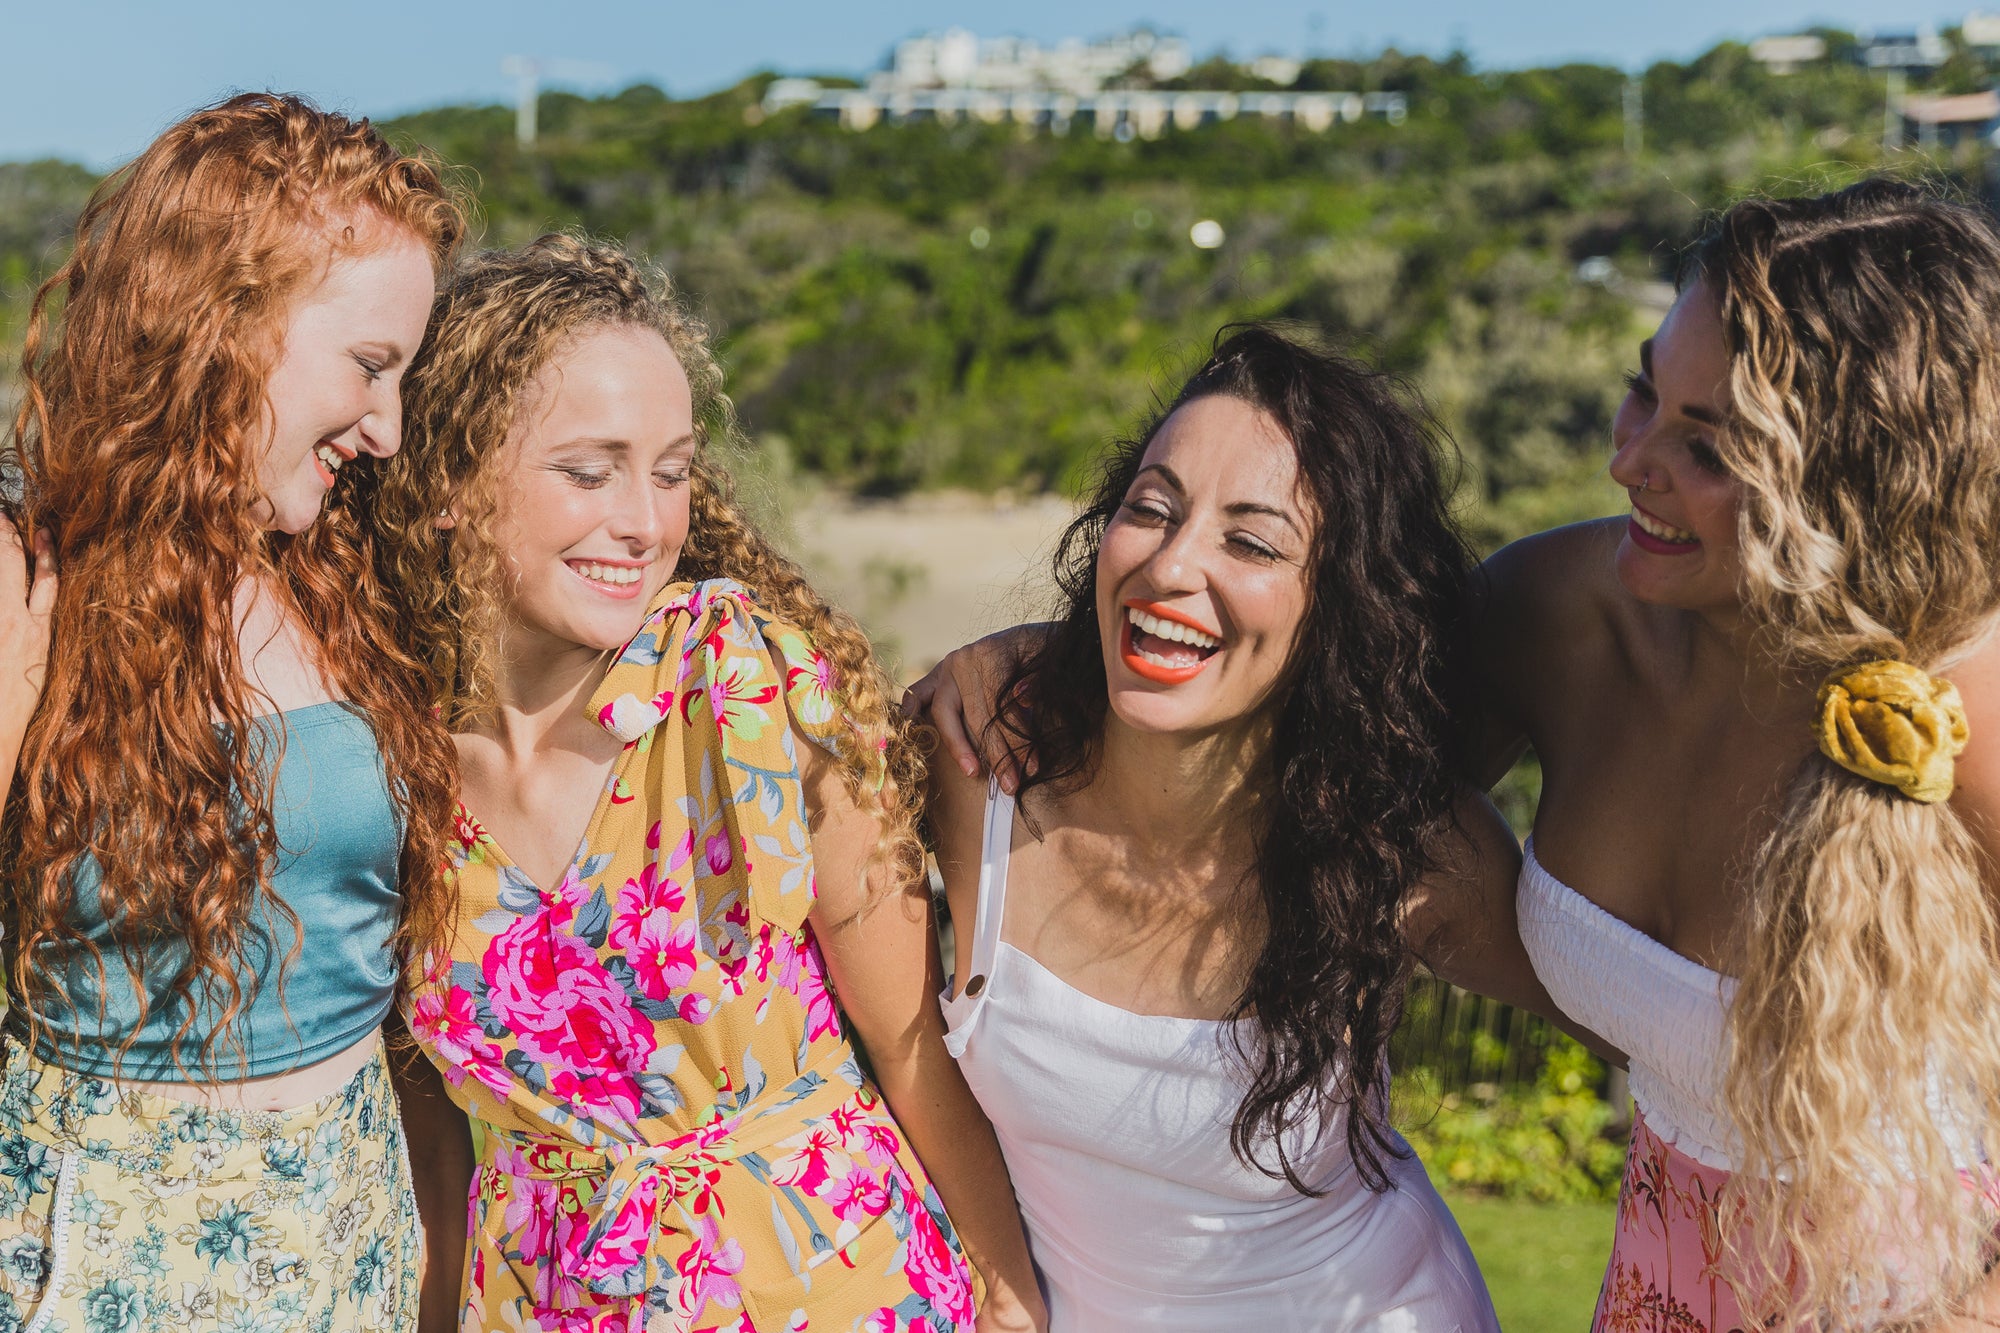 An image of 4 women with curly hair wearing bright clothing and smiling and laughing in the sunshine with their arms linked around each other.